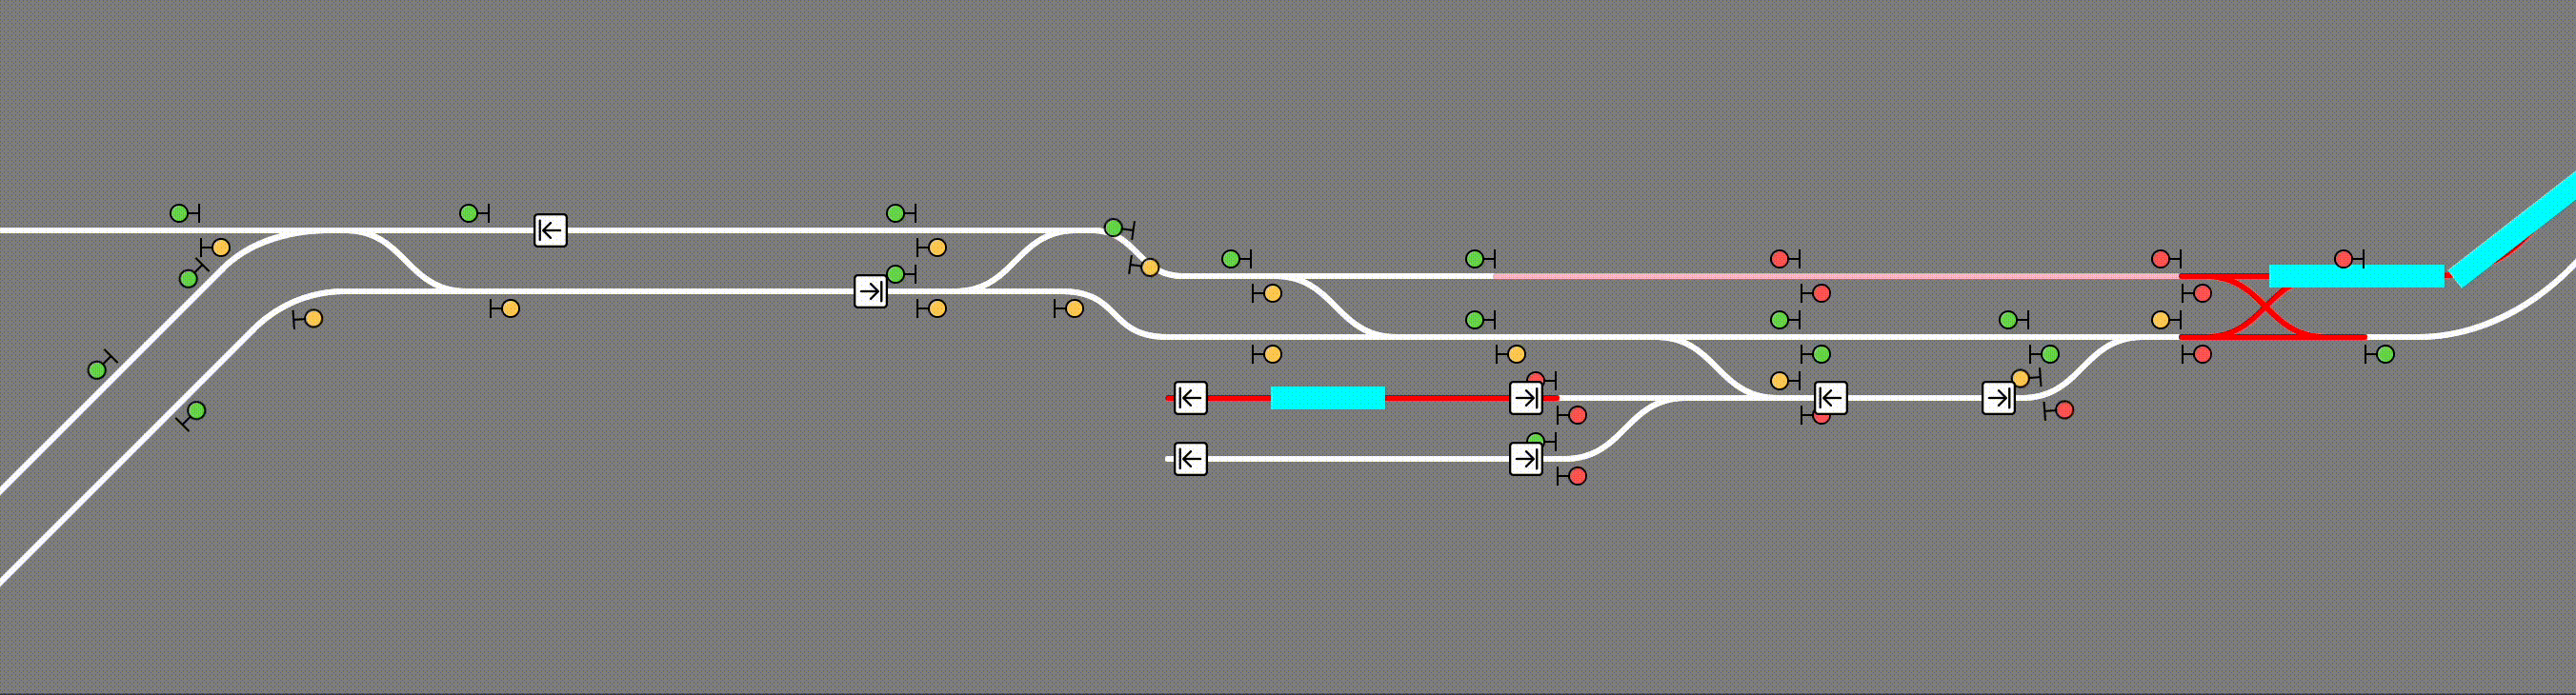 Visualizing a train on the map as it moves throughout the network. (Speed increased for demonstration purposes.)